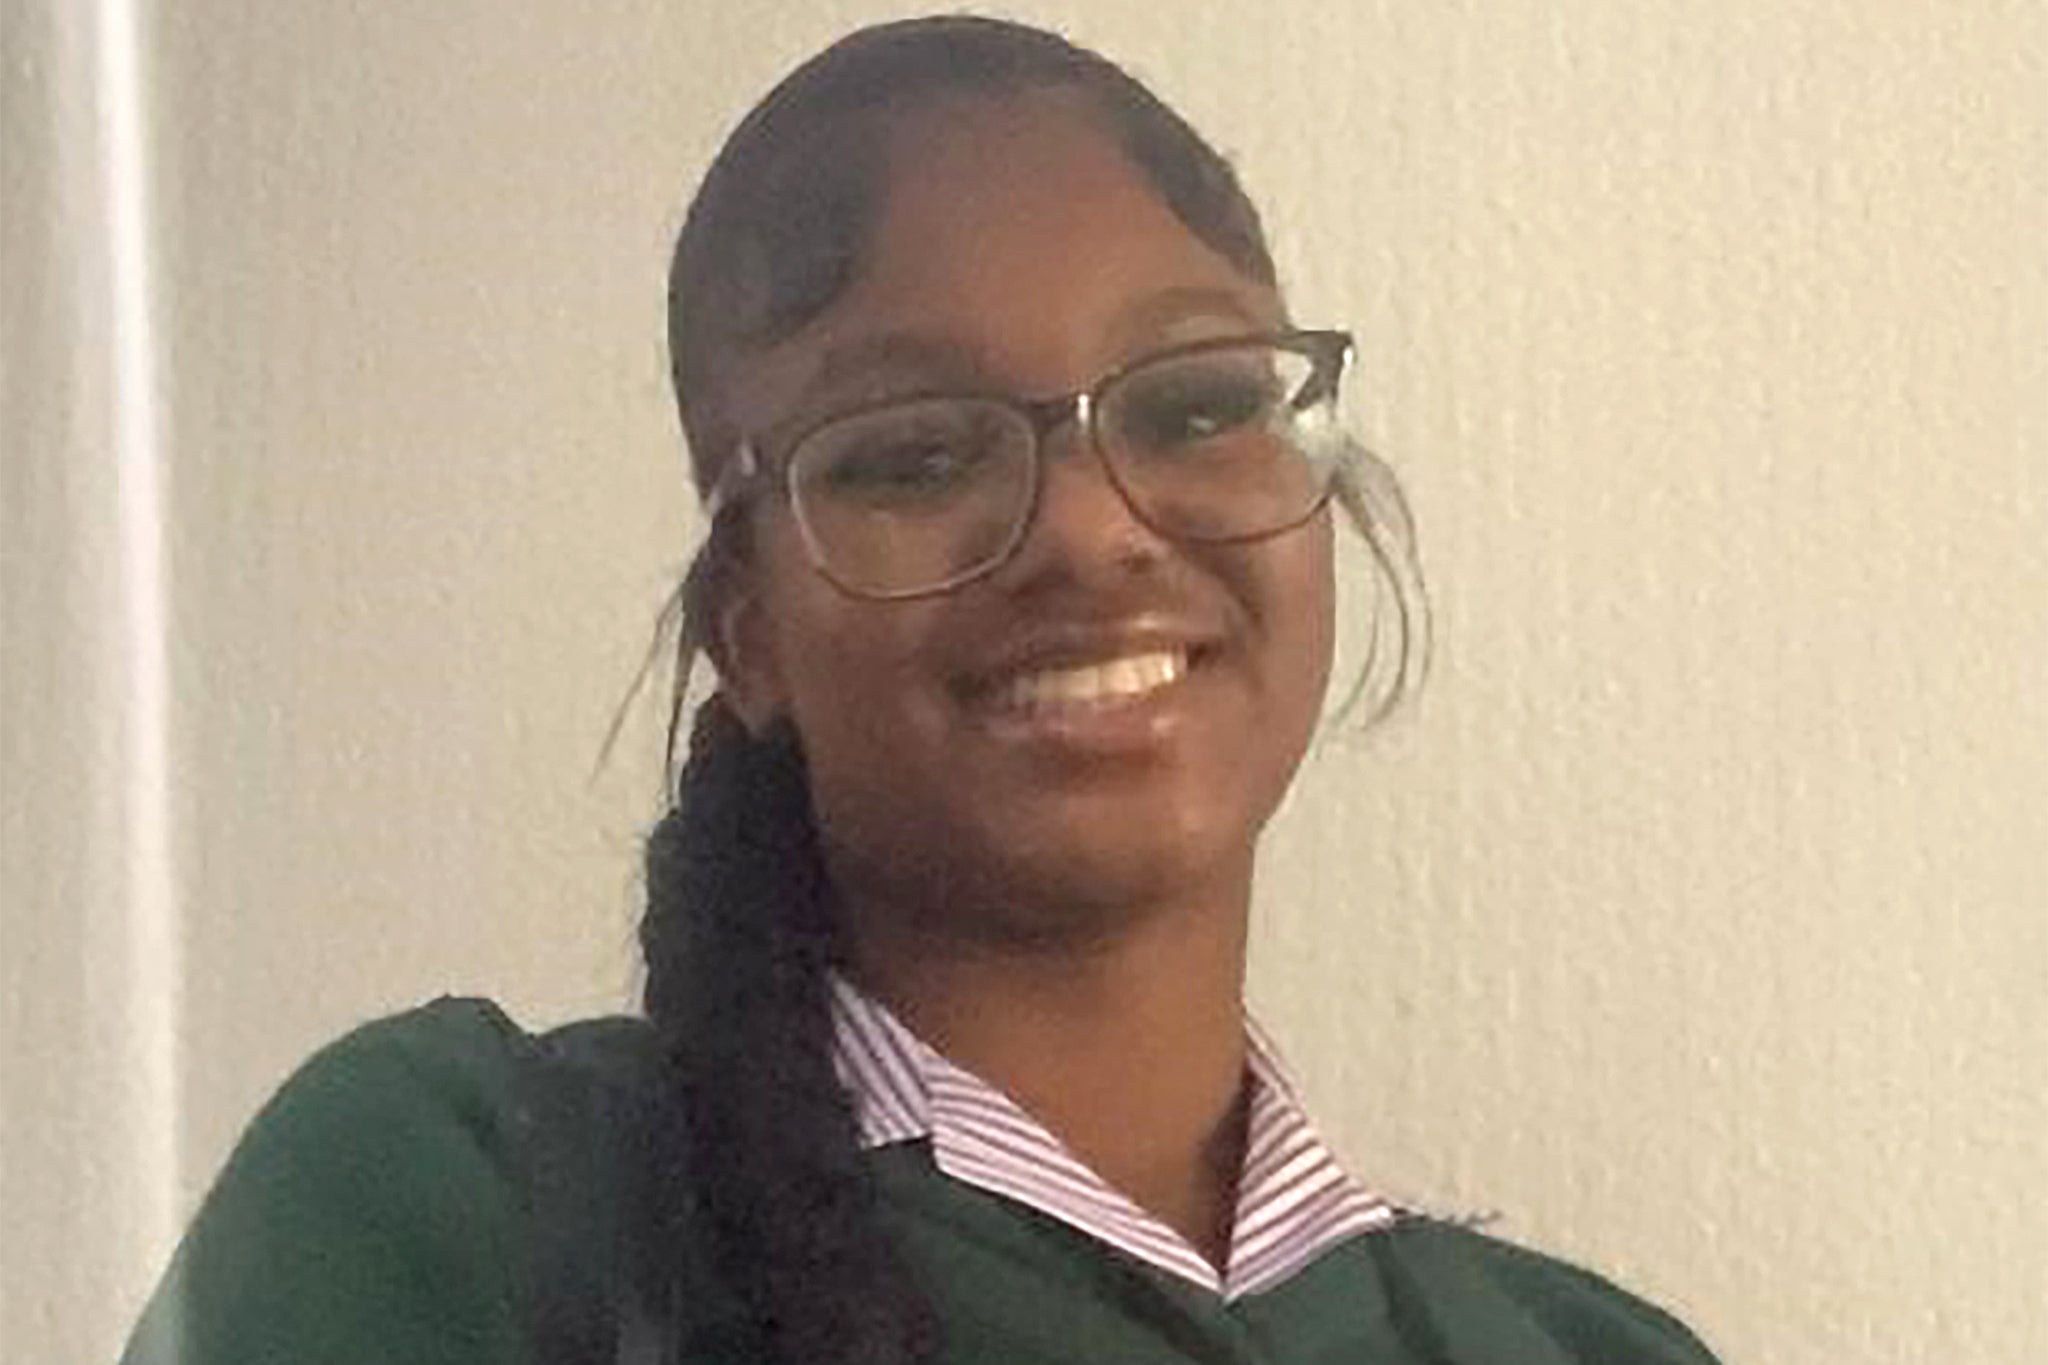 Elianne Andam, 15, died after a knife attack on her way to school in Croydon